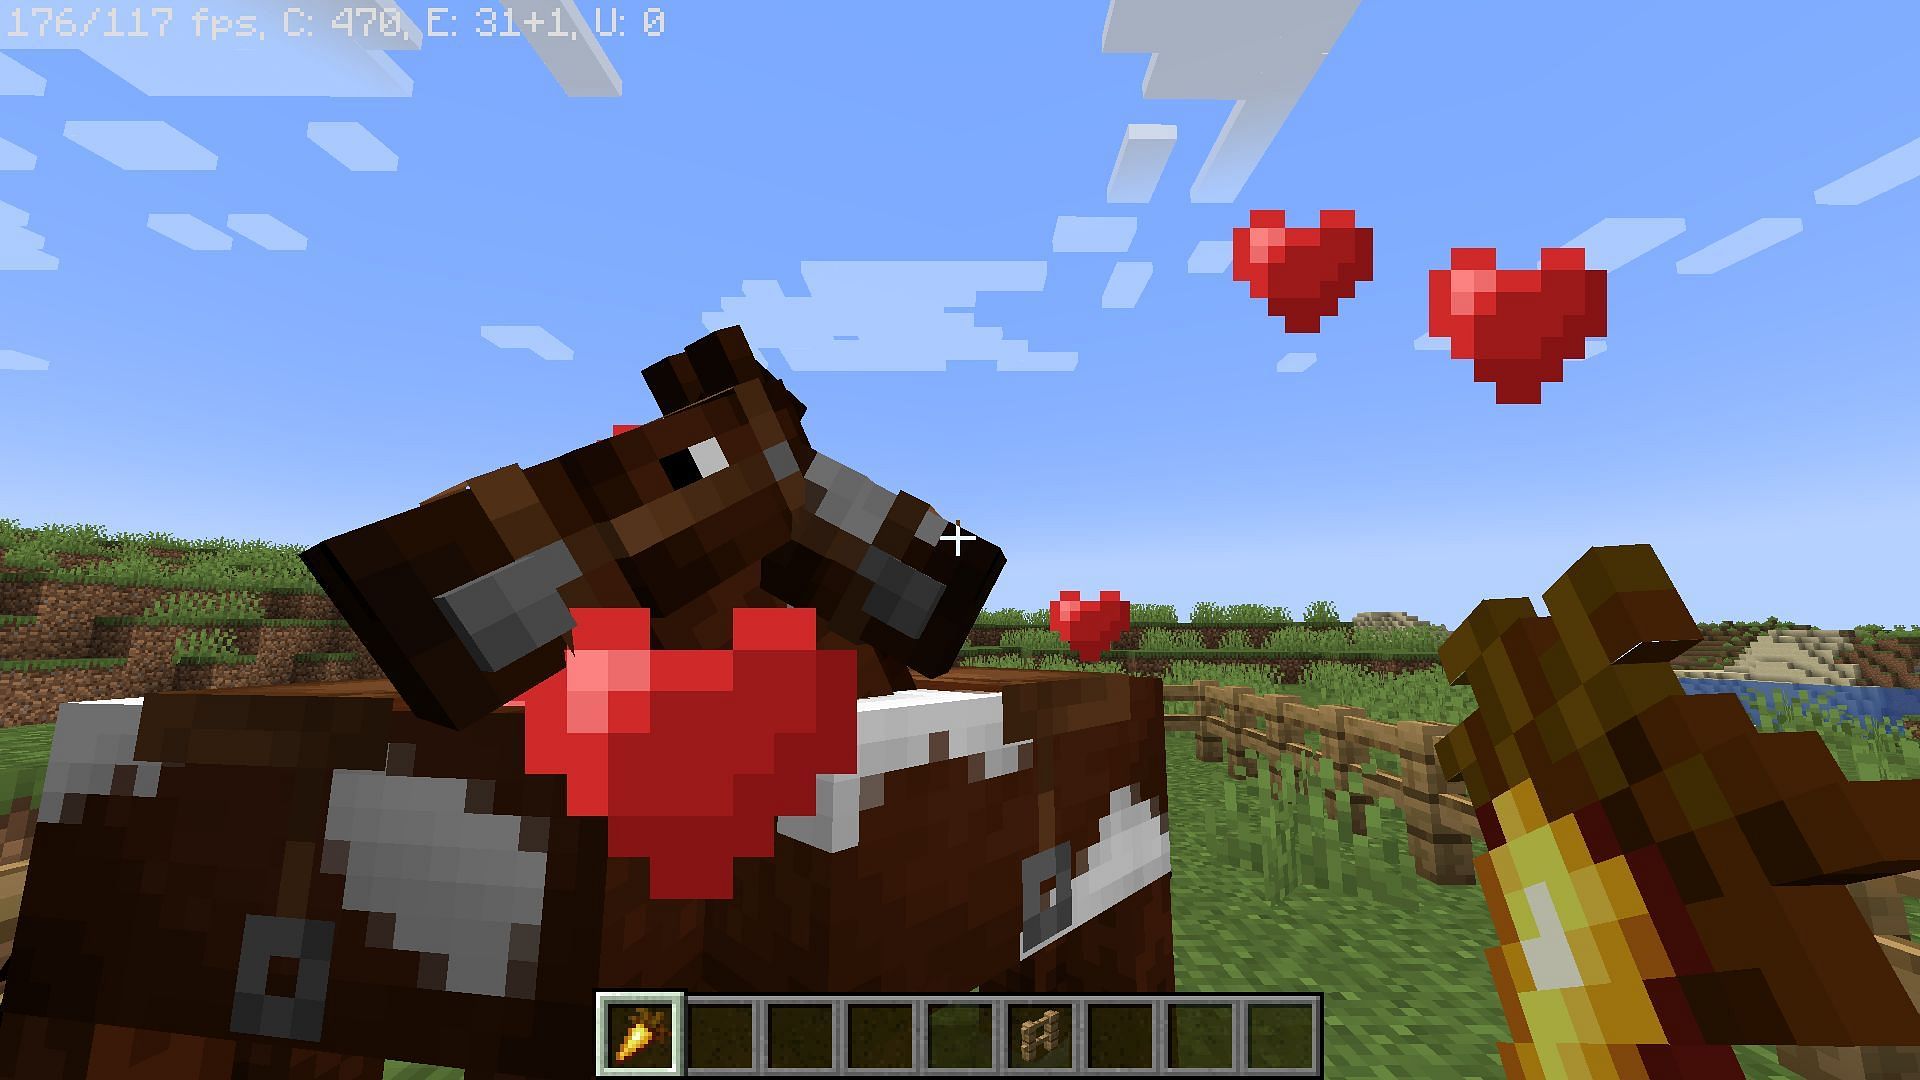 Horses breeding with each other after eating golden carrot in Minecraft (Image via Mojang)